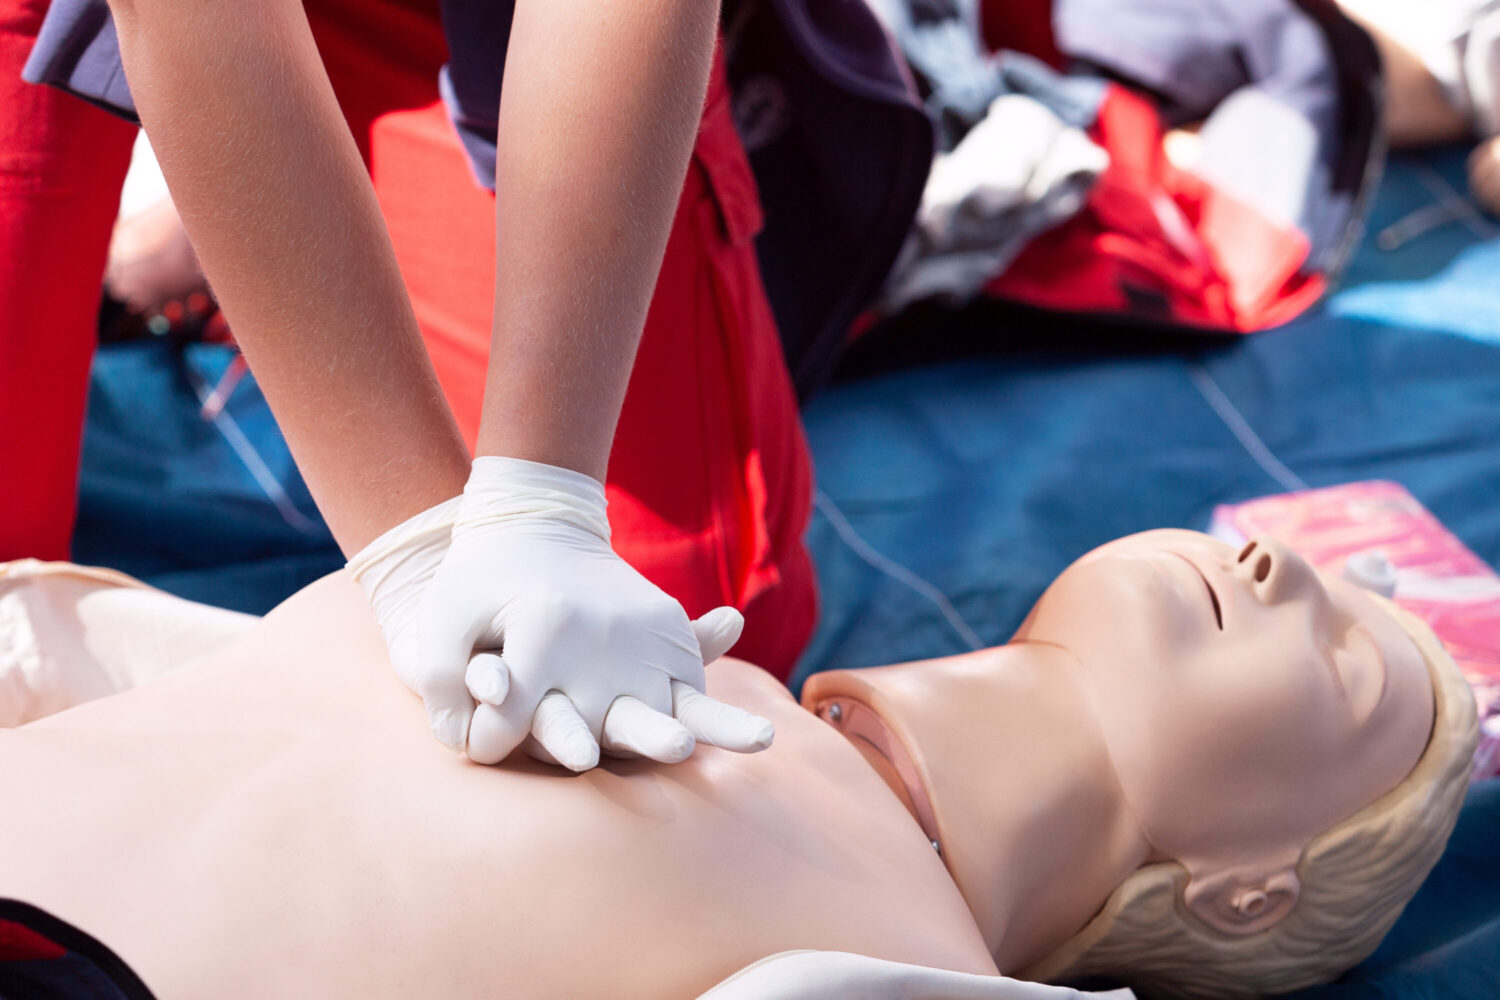 CPR - Cardiopulmonary resuscitation and first aid class or training.